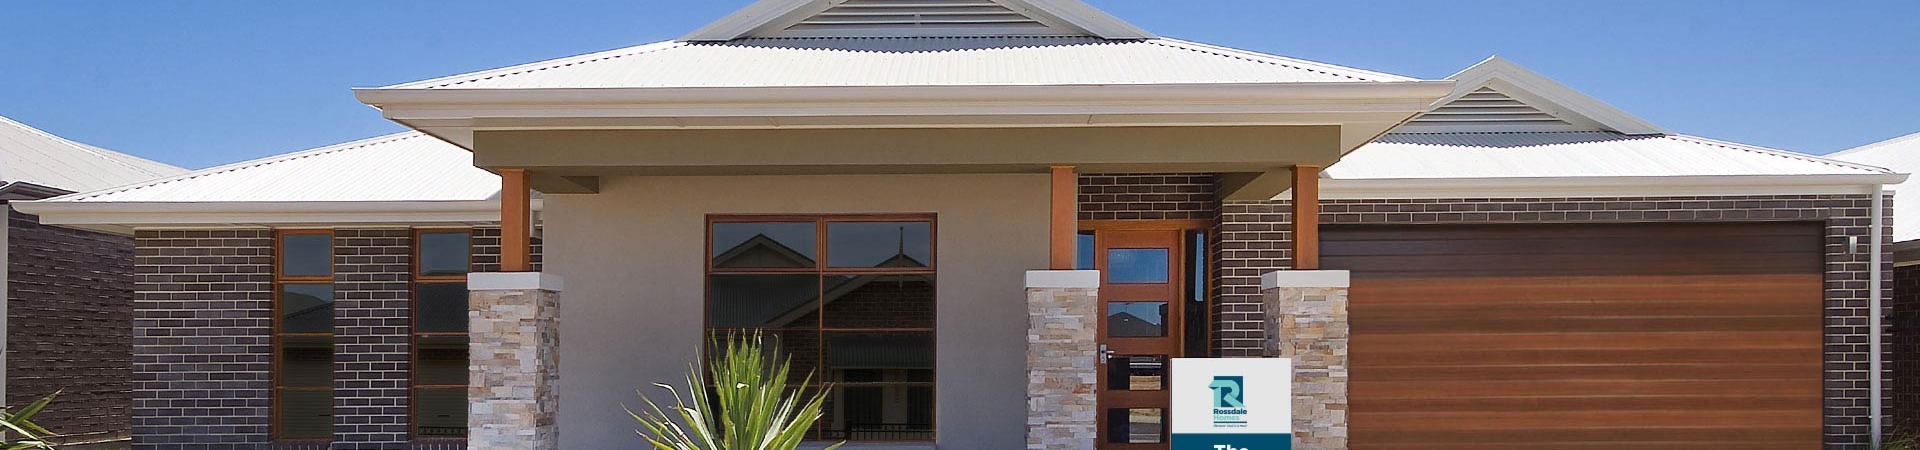 Home Designs Rossdale Homes Rossdale Homes Adelaide South